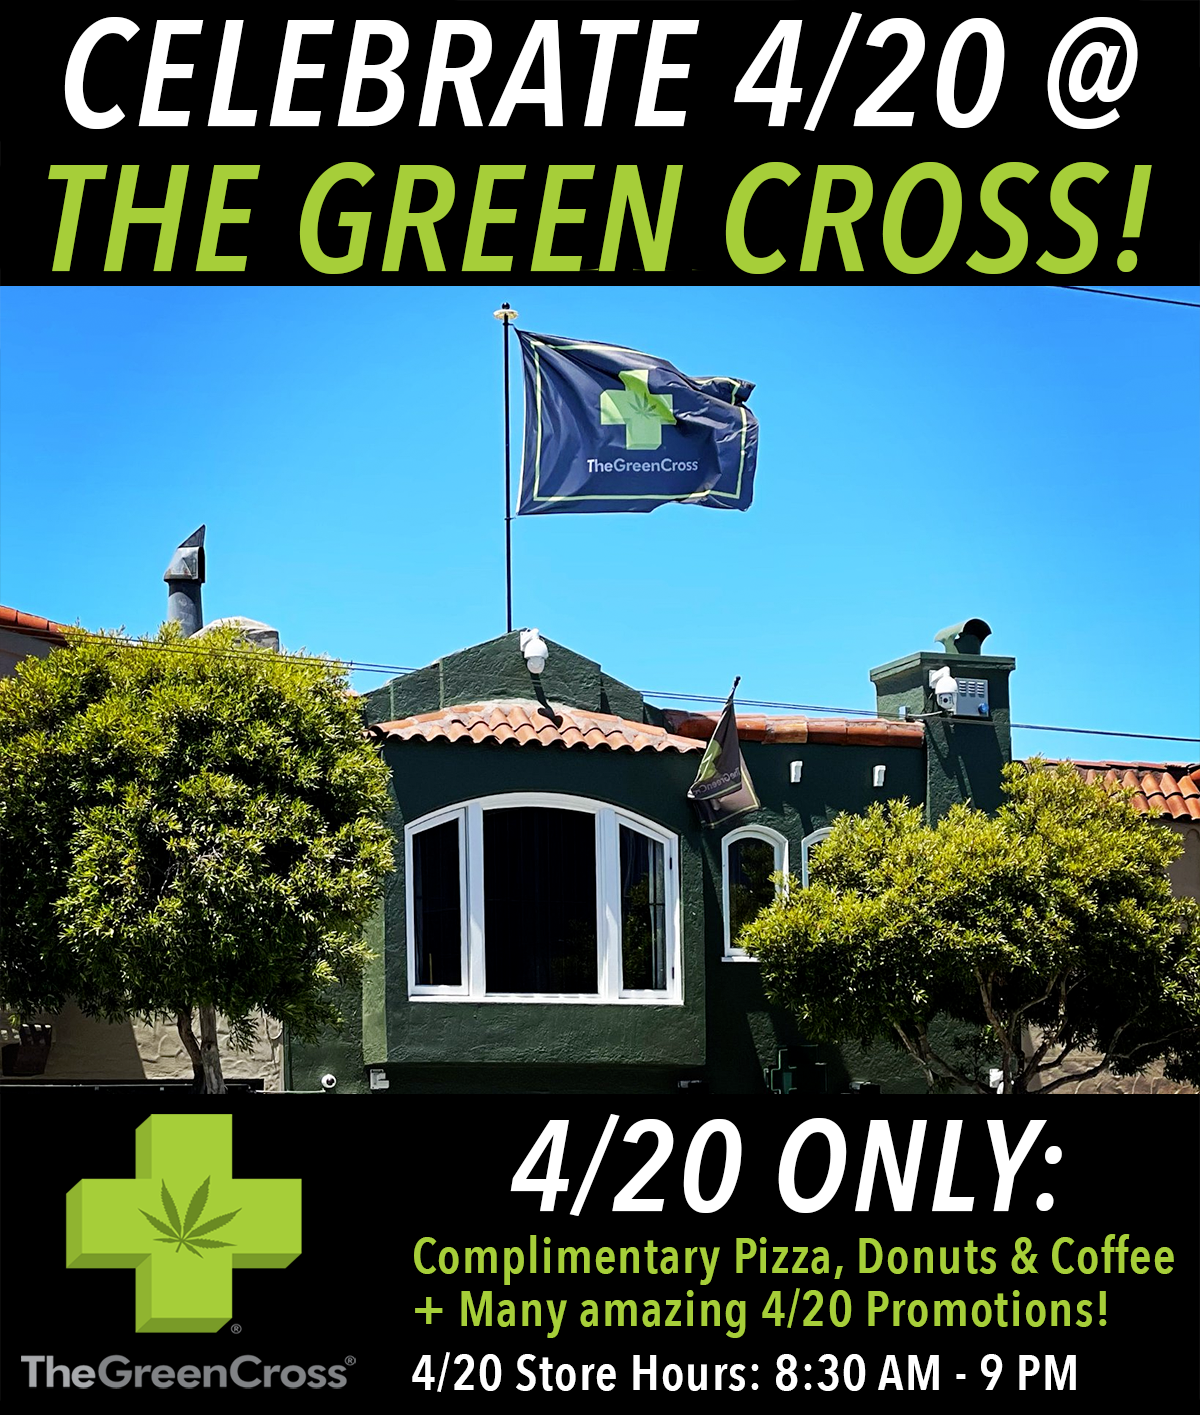 Celebrate 4/20 at The Green Cross!